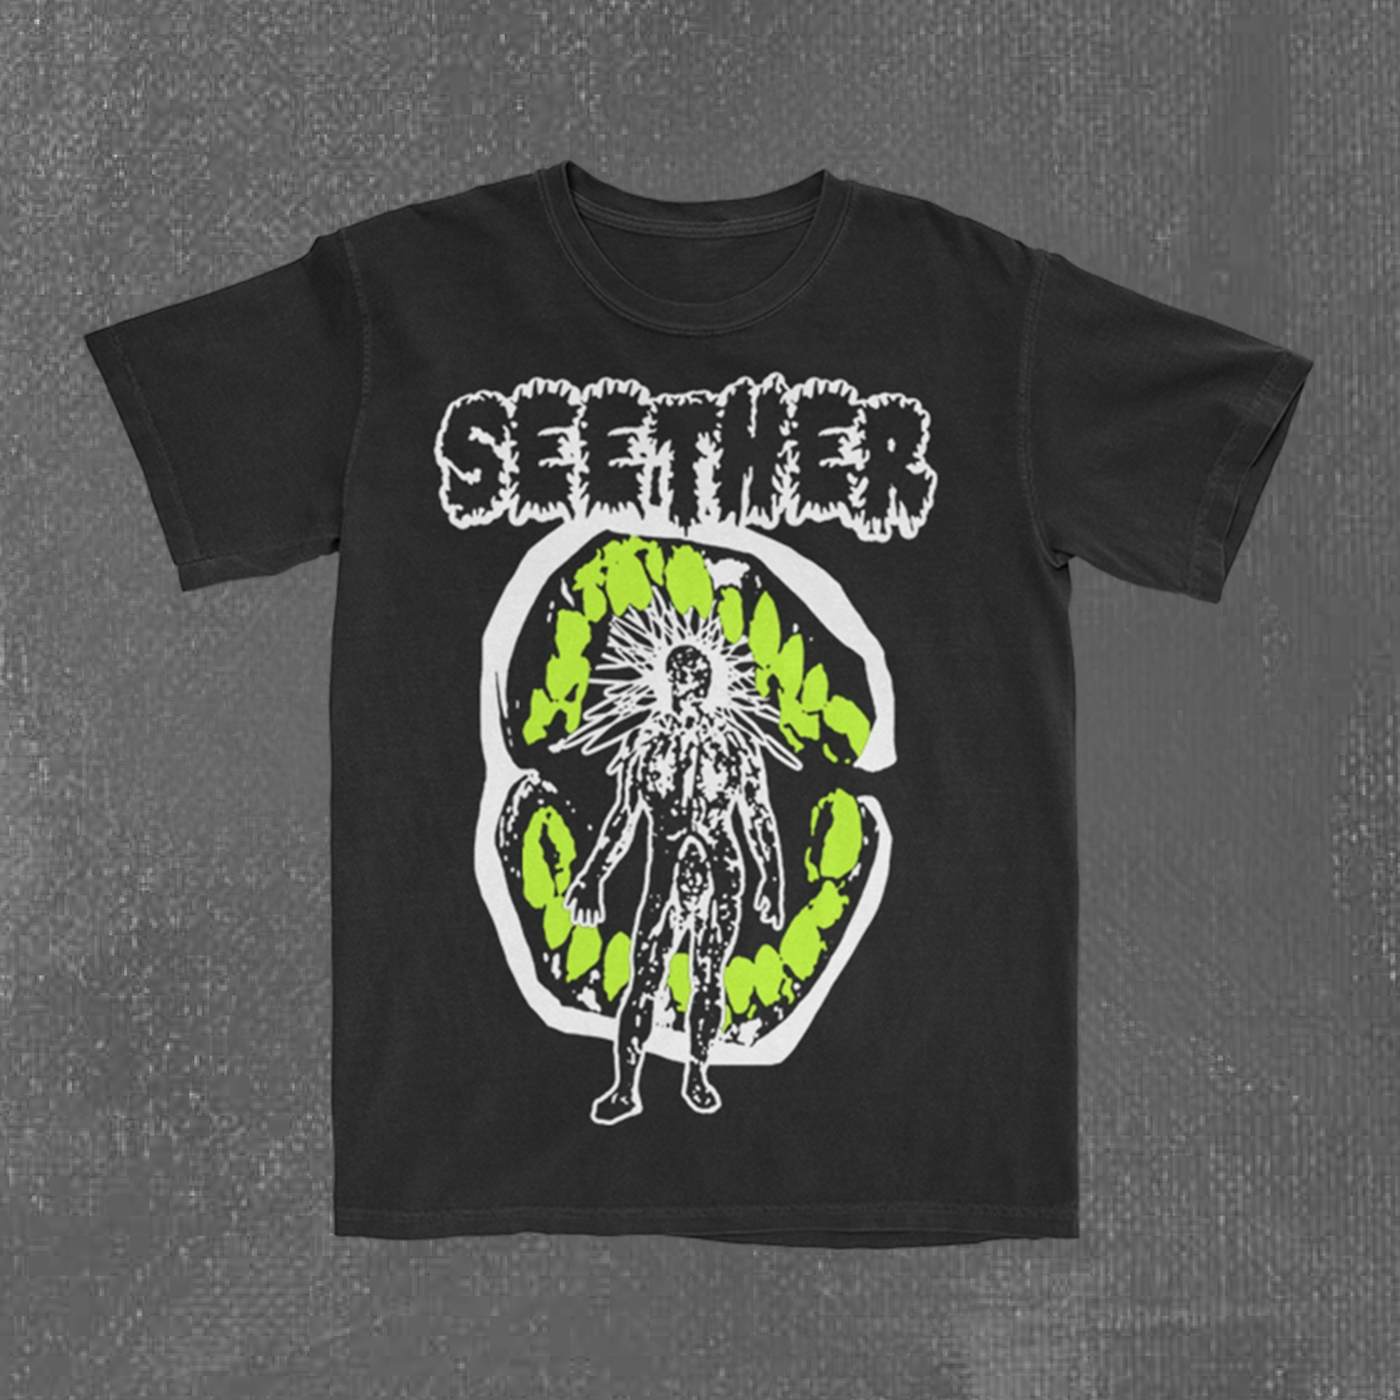 Seether Mouth Man T-Shirt